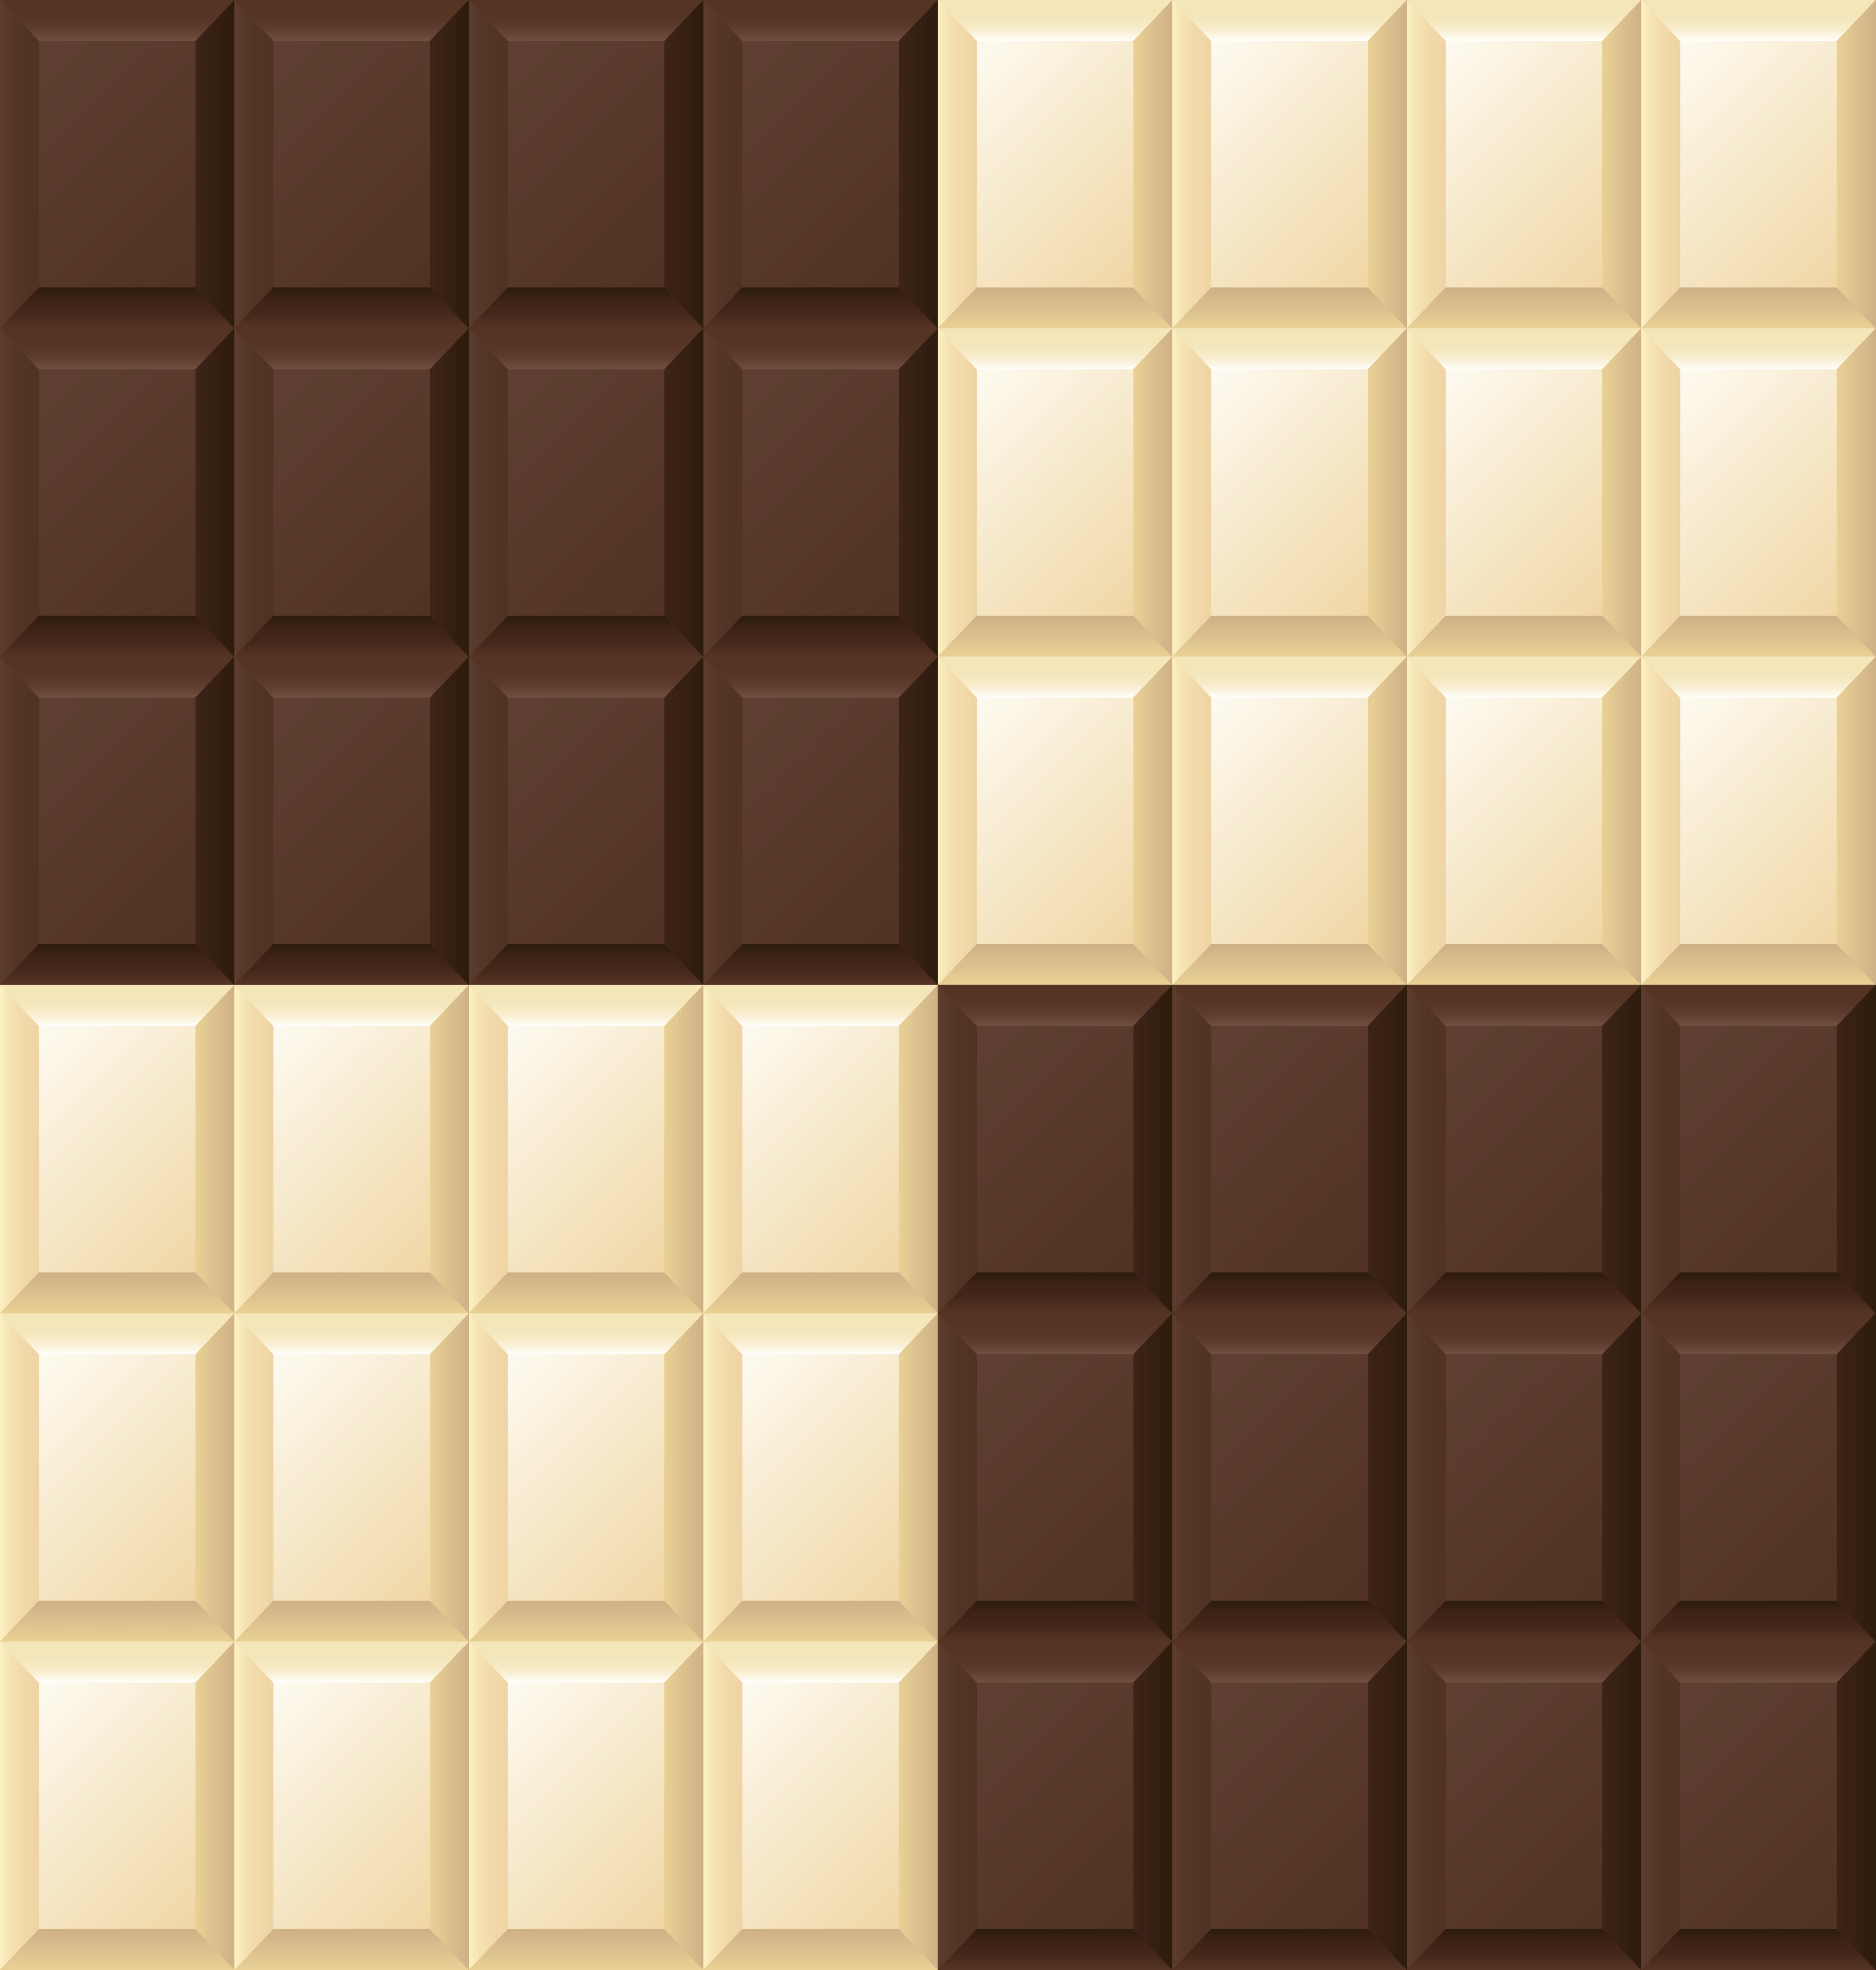 Chocolate jar on white wallpaper Royalty Free Vector Image